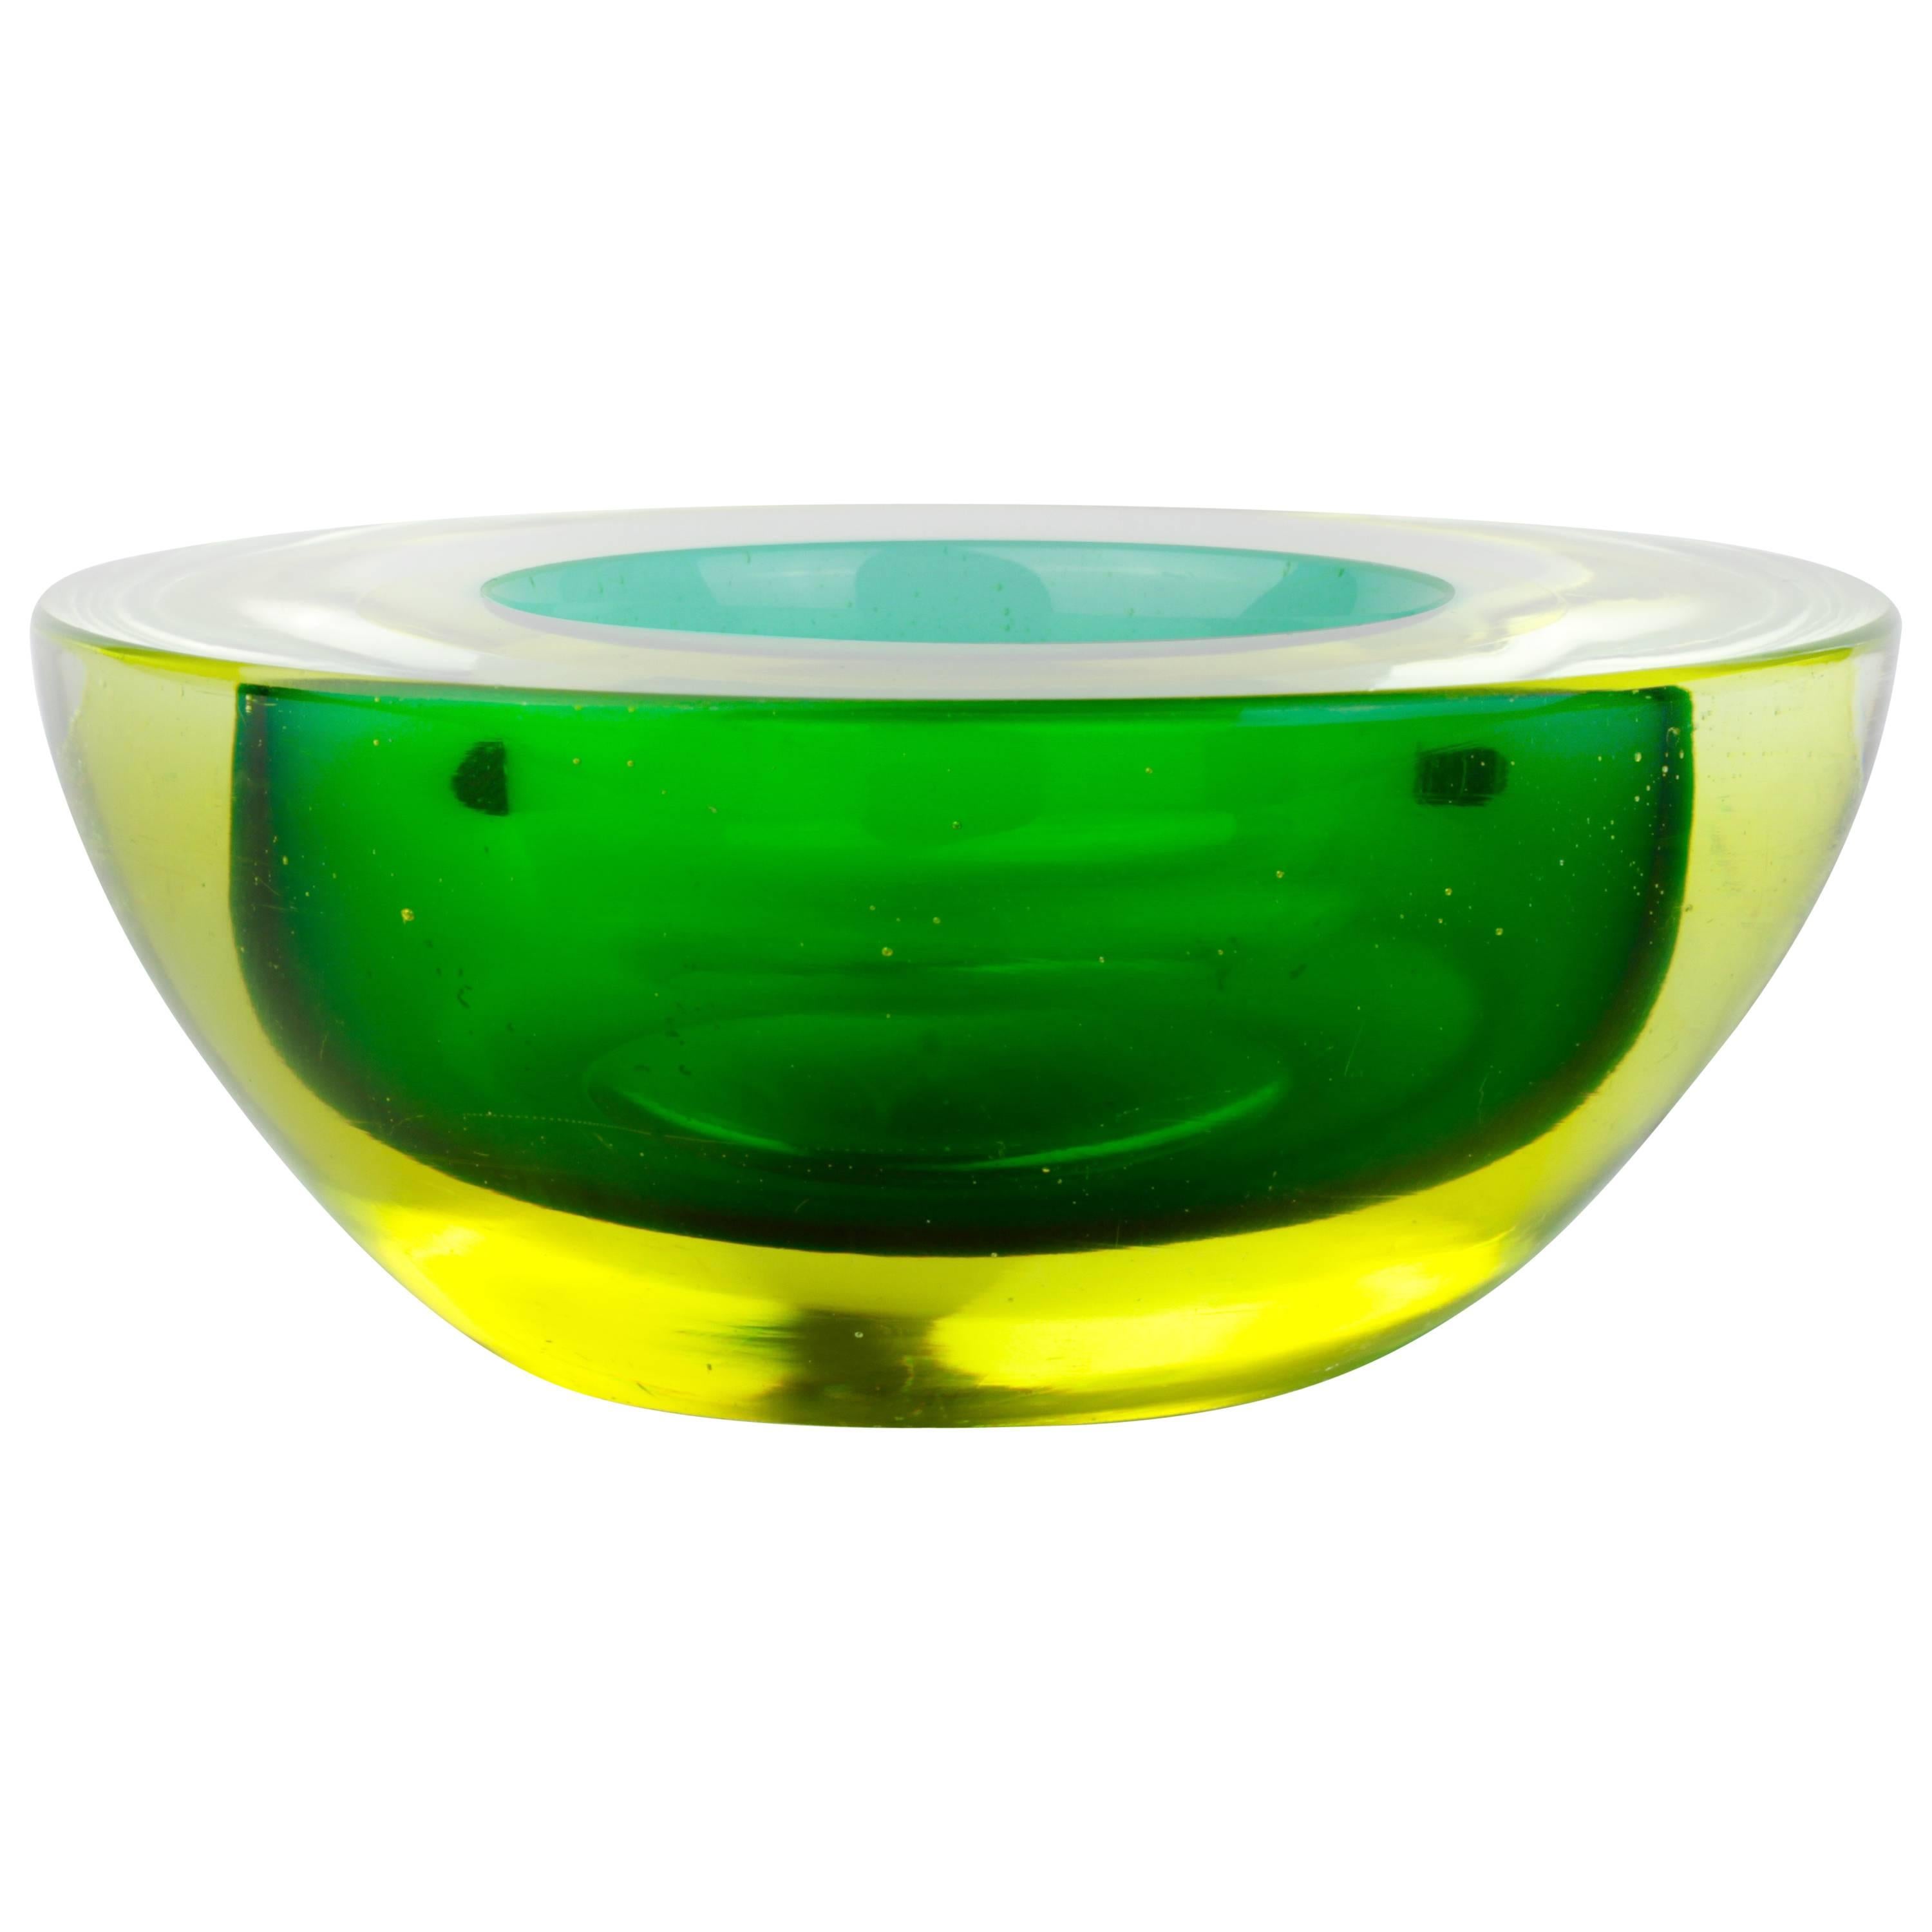 Rare Green and Yellow Murano Sommerso Glass Bowl by Seguso for Vetri d'Arte